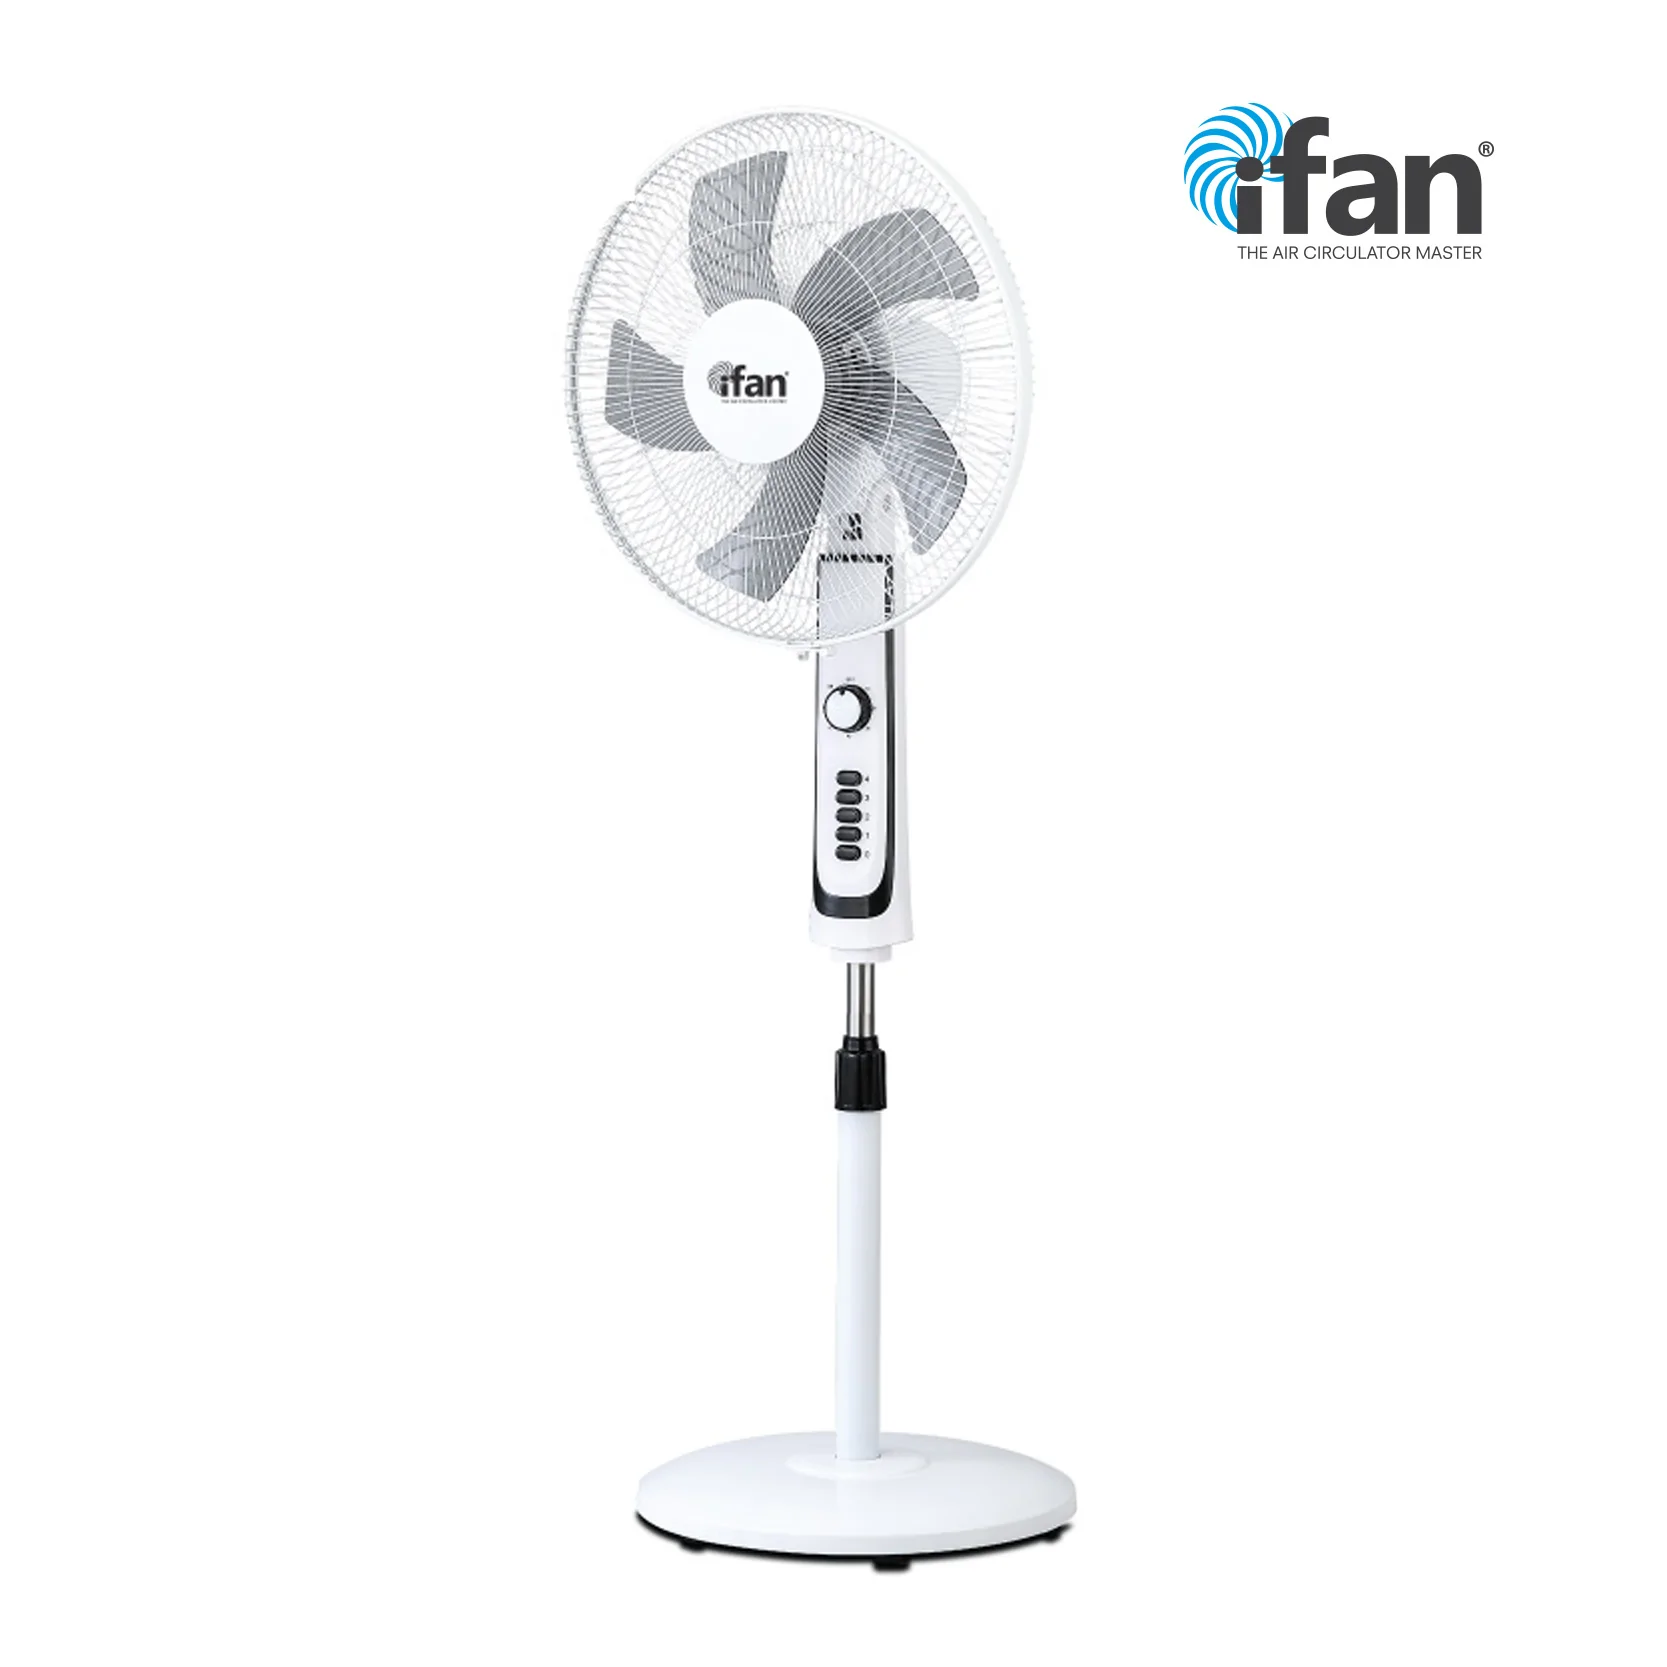 IFan Stand Fan 16"/400MM With Air CIRCULATOR